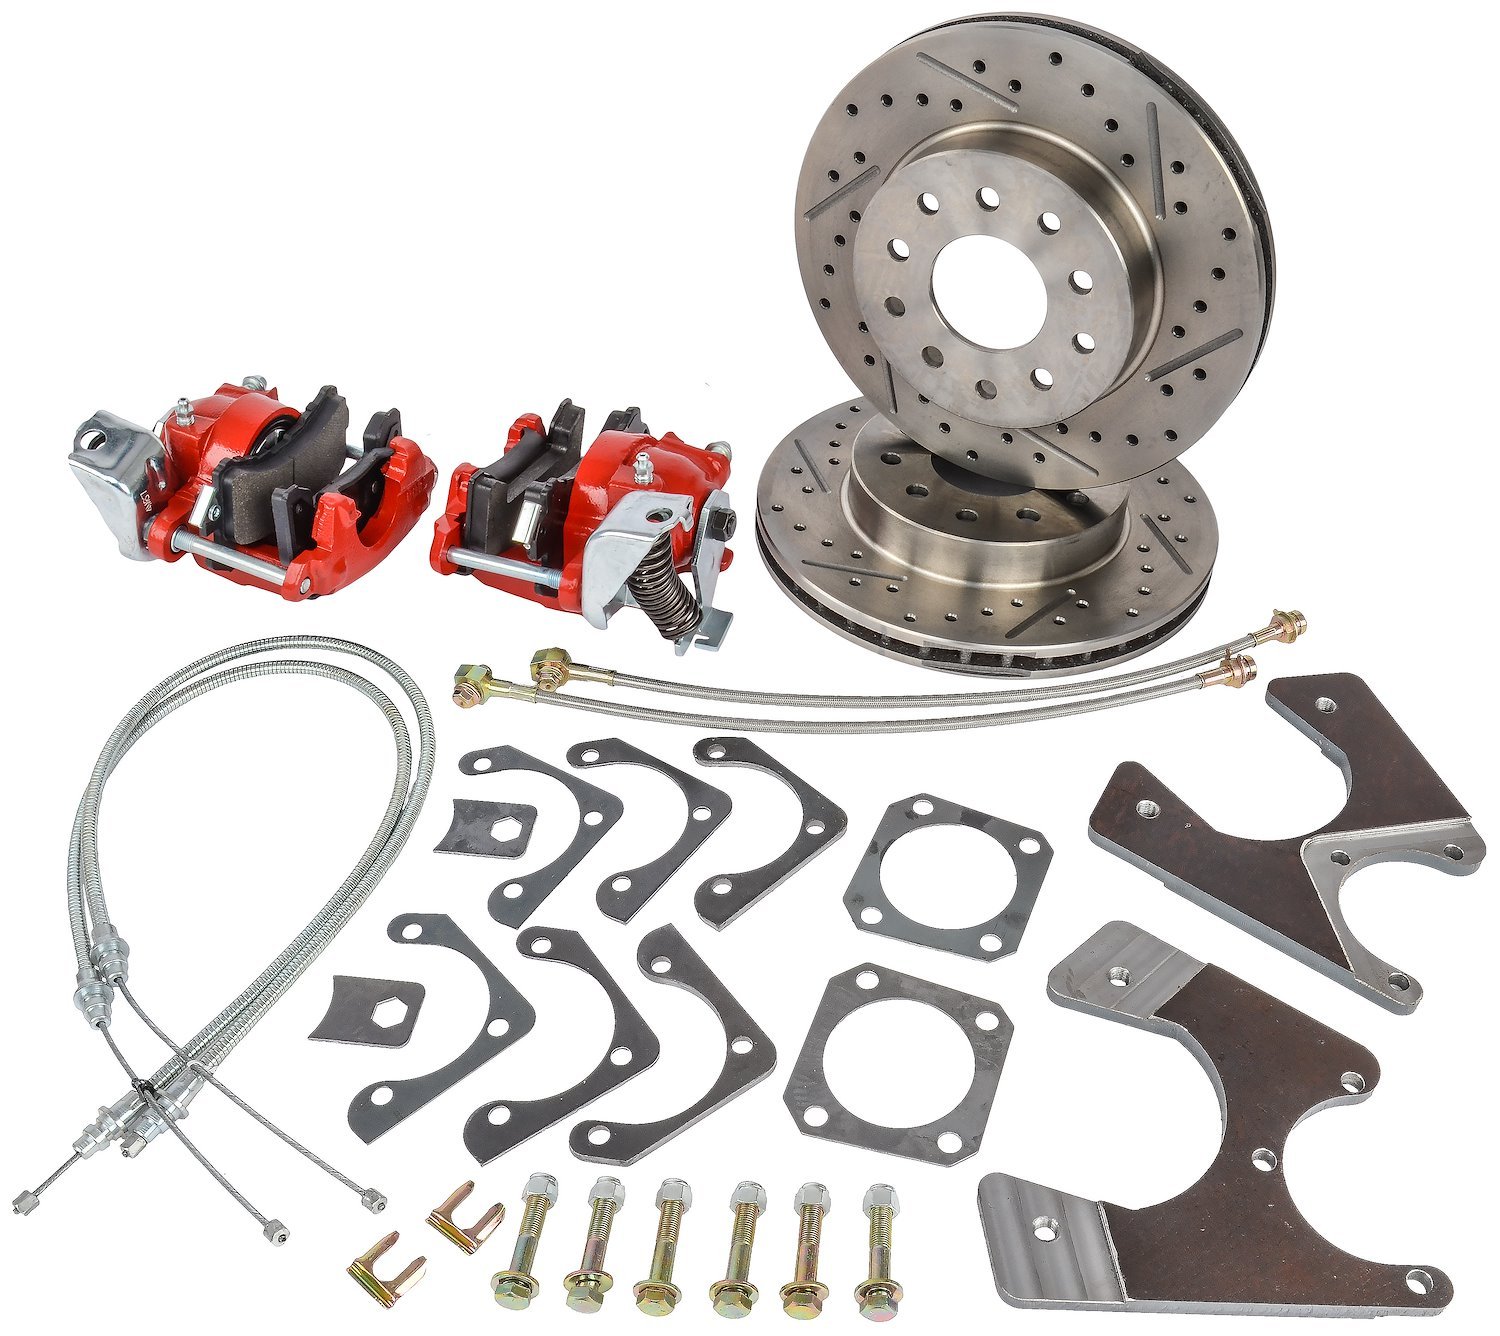 GM 10 & 12 Bolt Rear Disc Brake Conversion Kit for 1964-1972 GM A-Body [Premium Kit with E-Brake & Red Calipers]